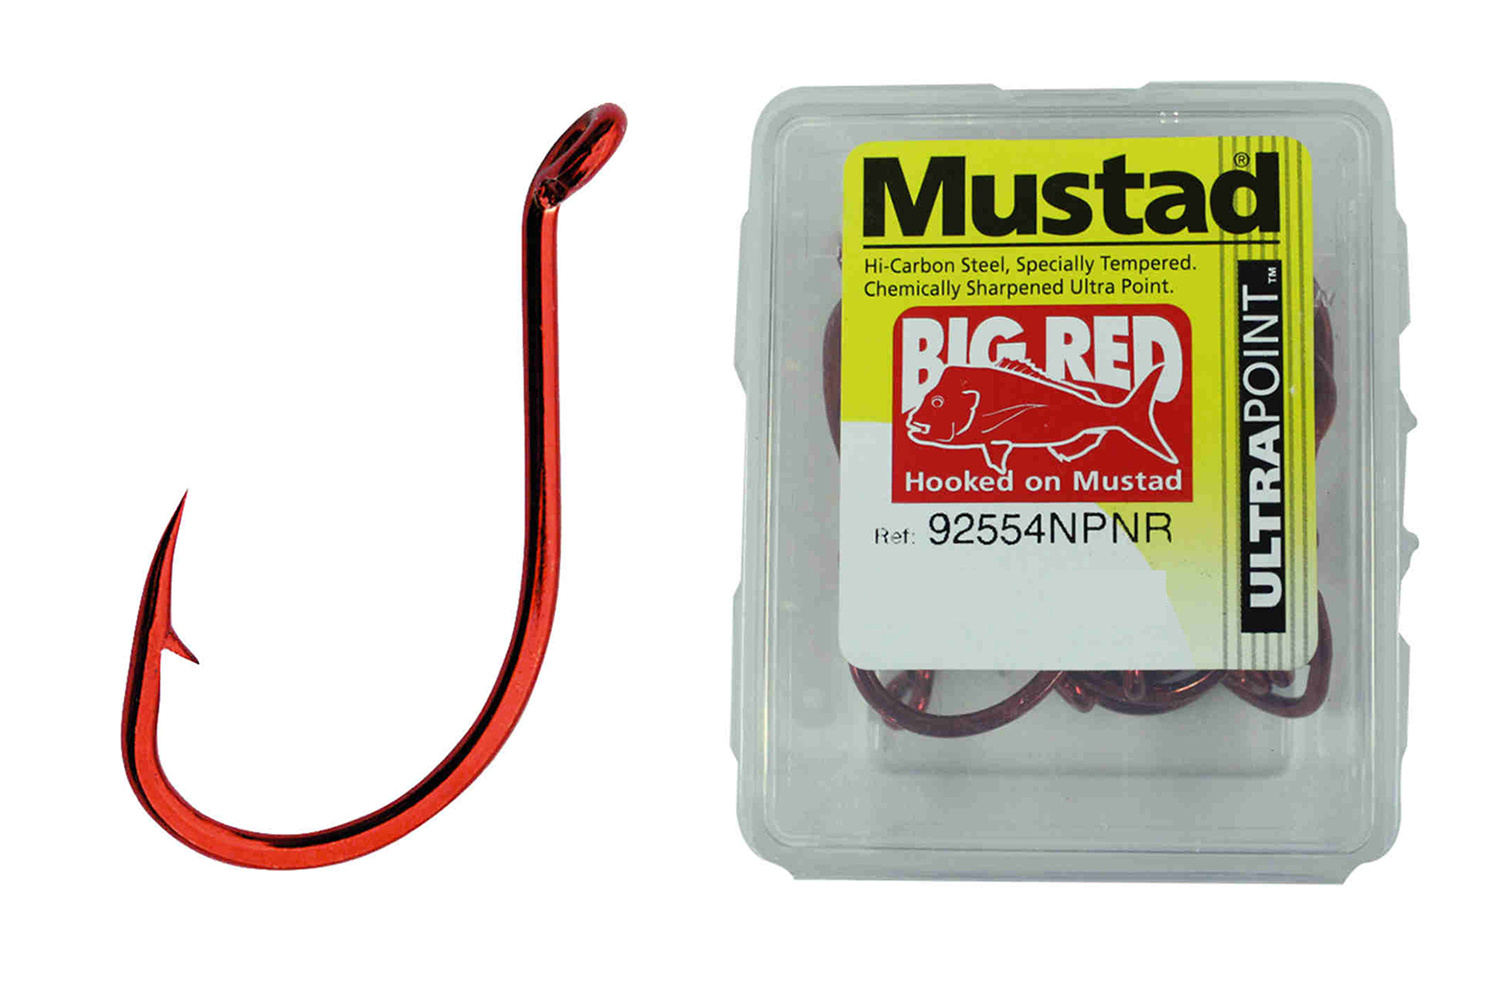 MUSTAD 92554NPNR - Size 6/0 Qty 25 - BIG RED X-STRONG CHEMICALLY SHARPENED